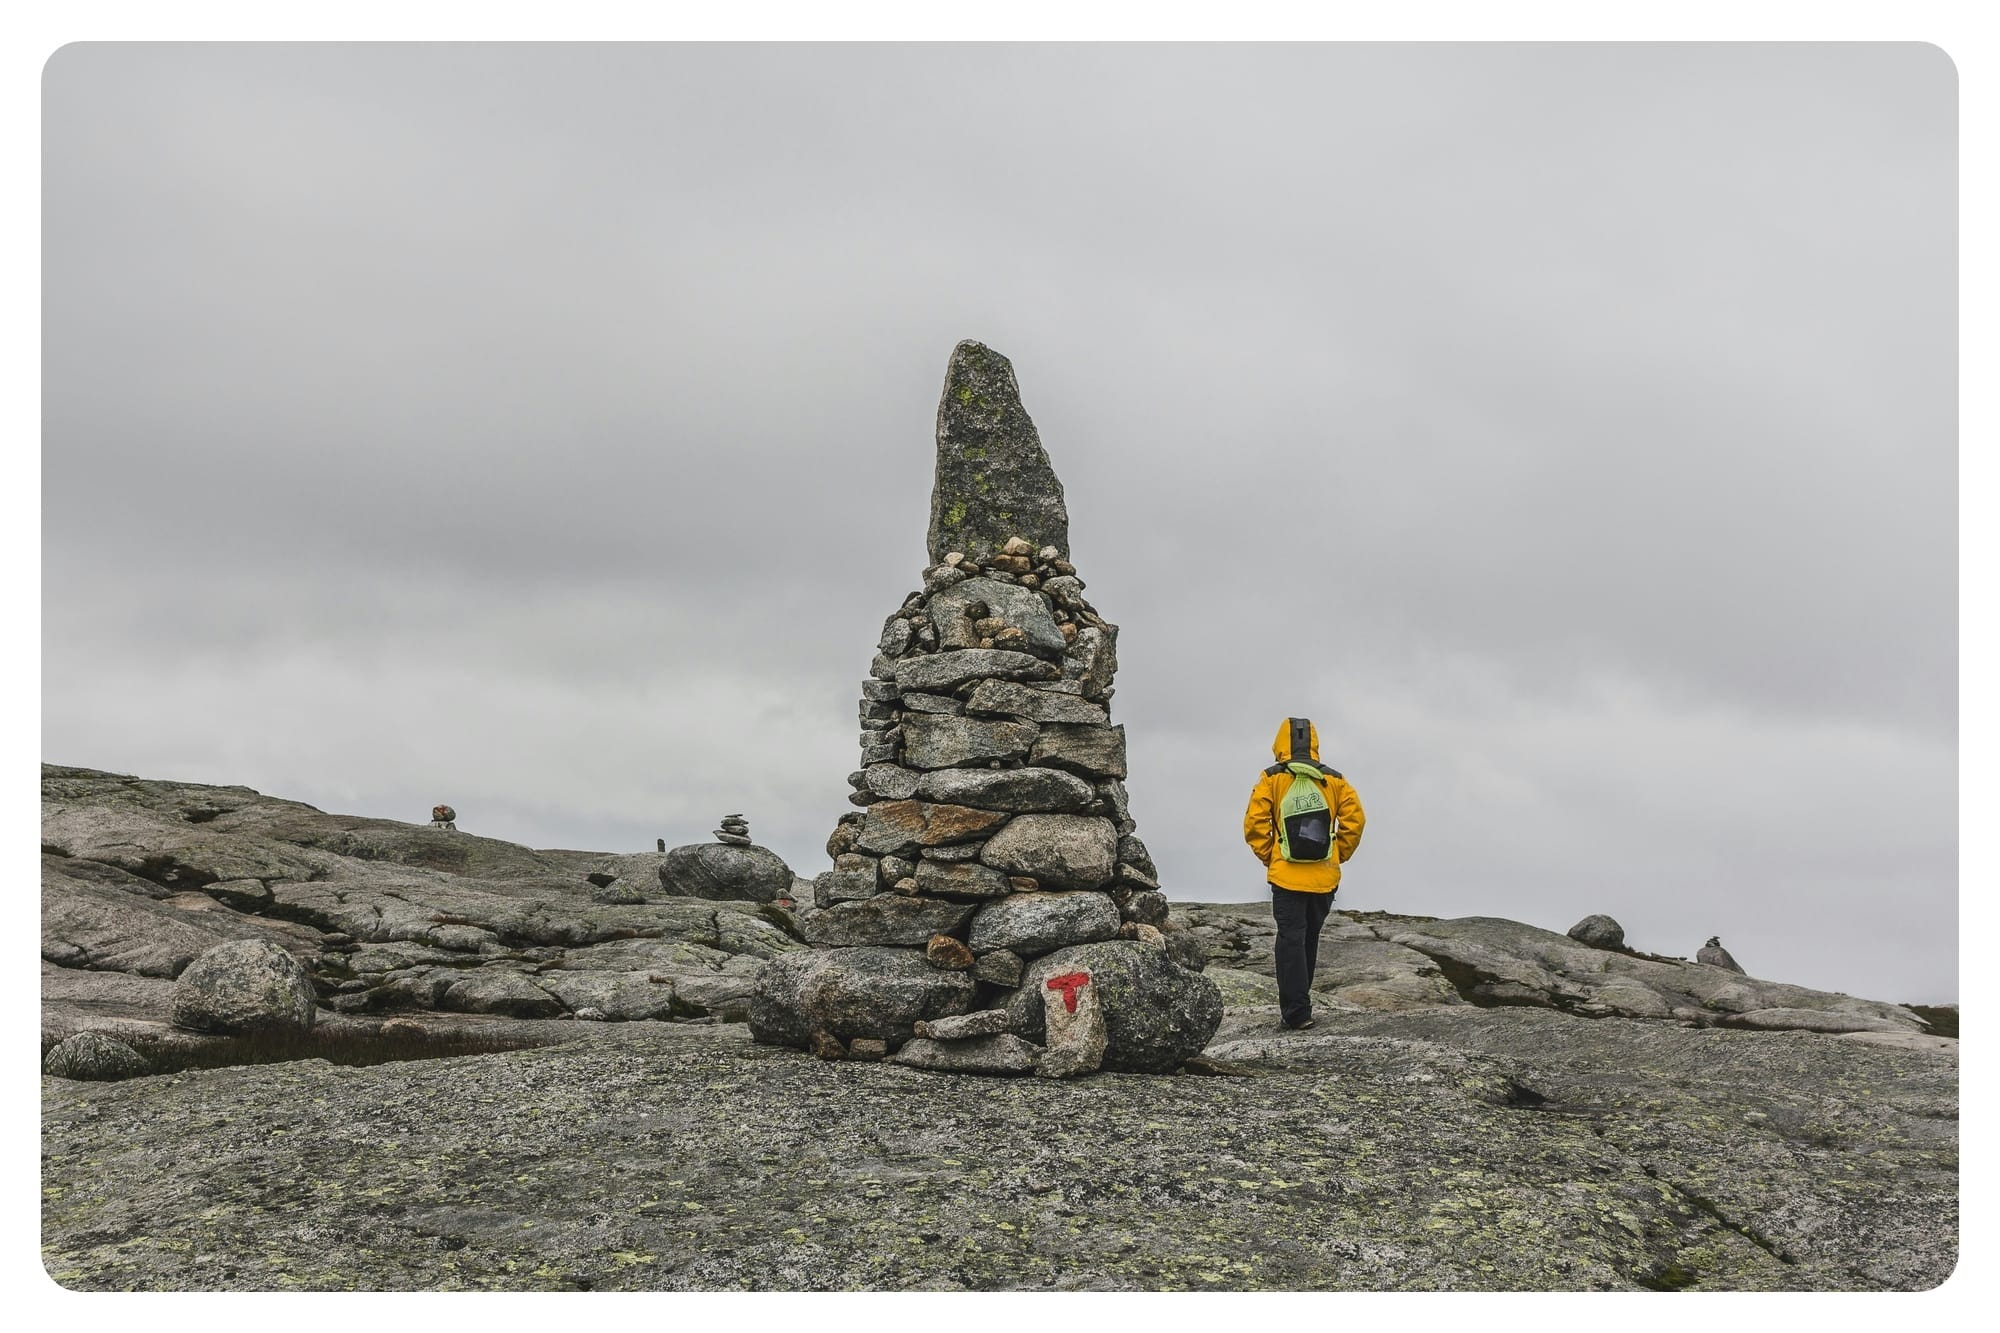 A large stone cairn marks the path across a bare, rocky landscape as a hiker in a bright yellow jacket passes by.